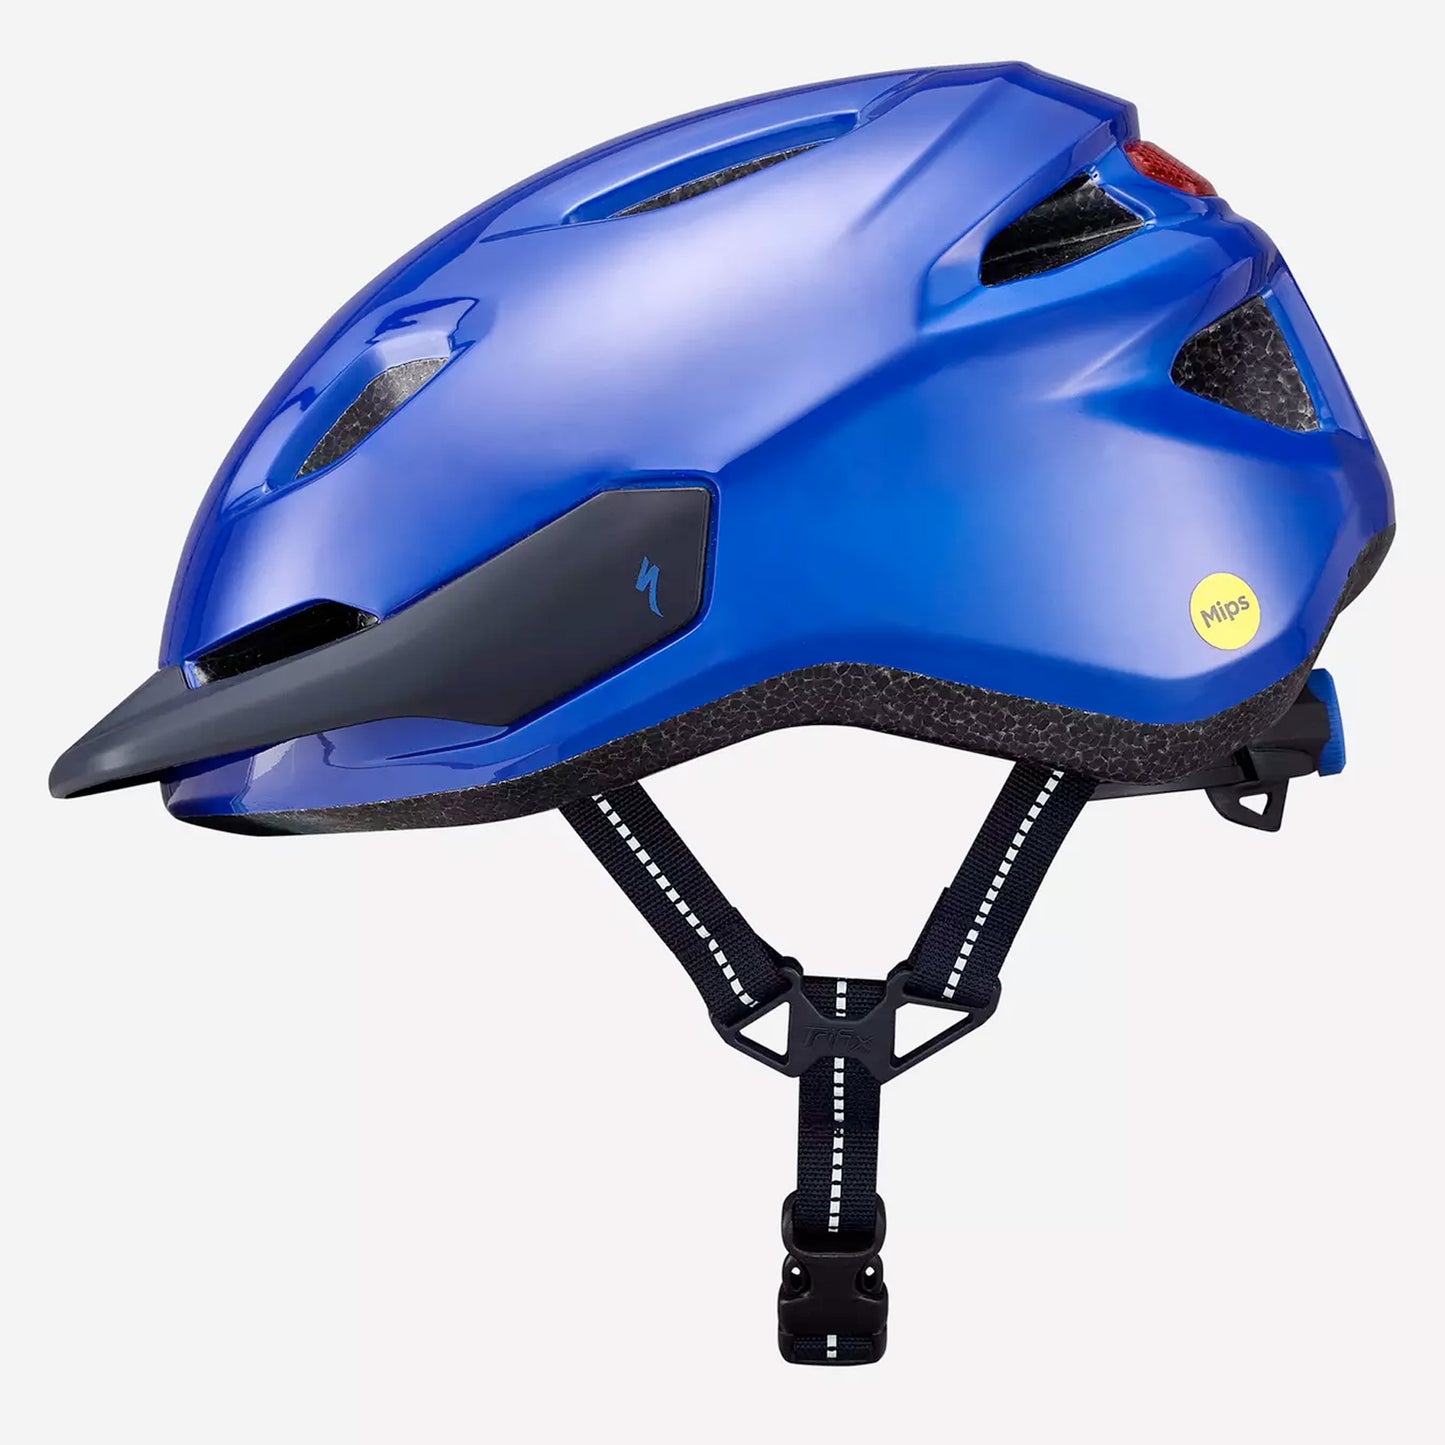 Specialized Shuffle 2 Children's Helmet with MIPS, Sapphire